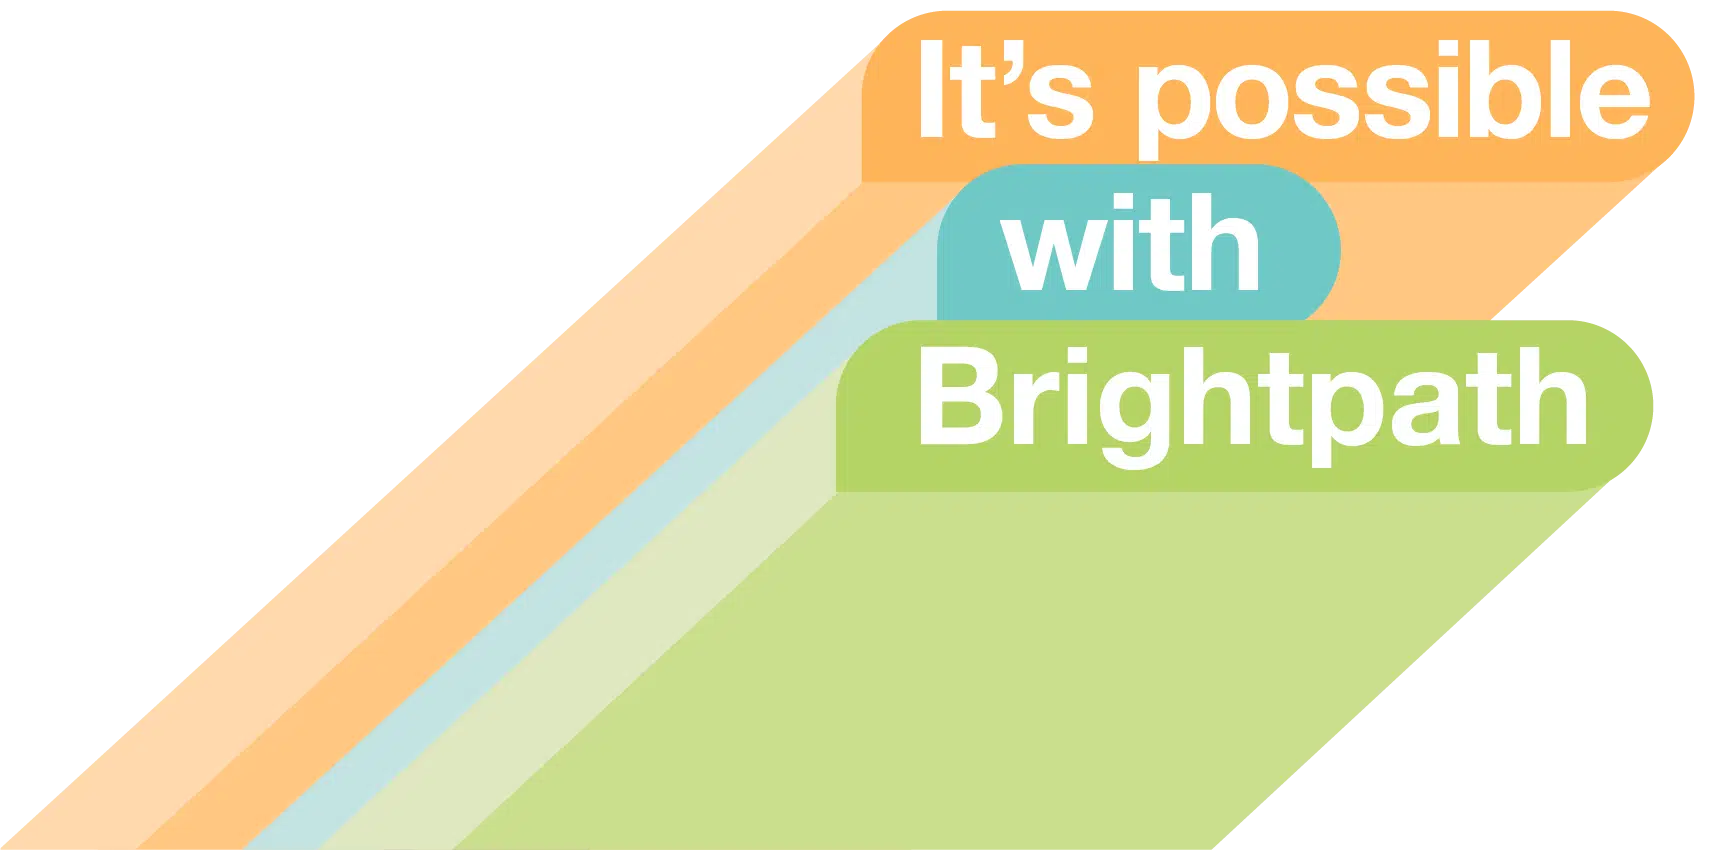 It's possible with Brightpath